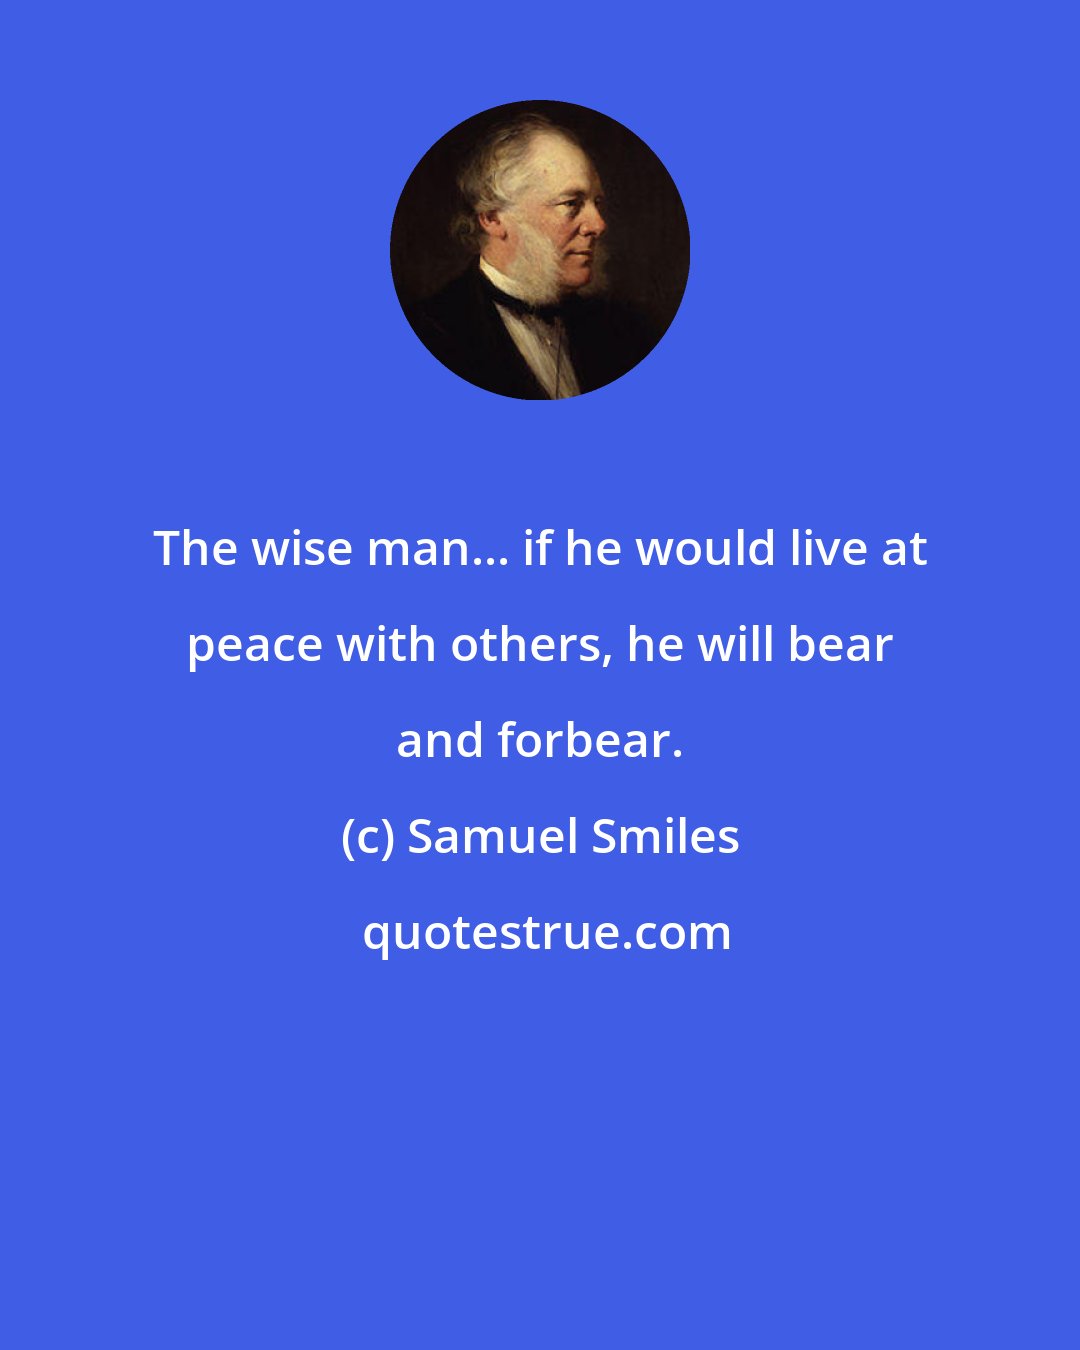 Samuel Smiles: The wise man... if he would live at peace with others, he will bear and forbear.